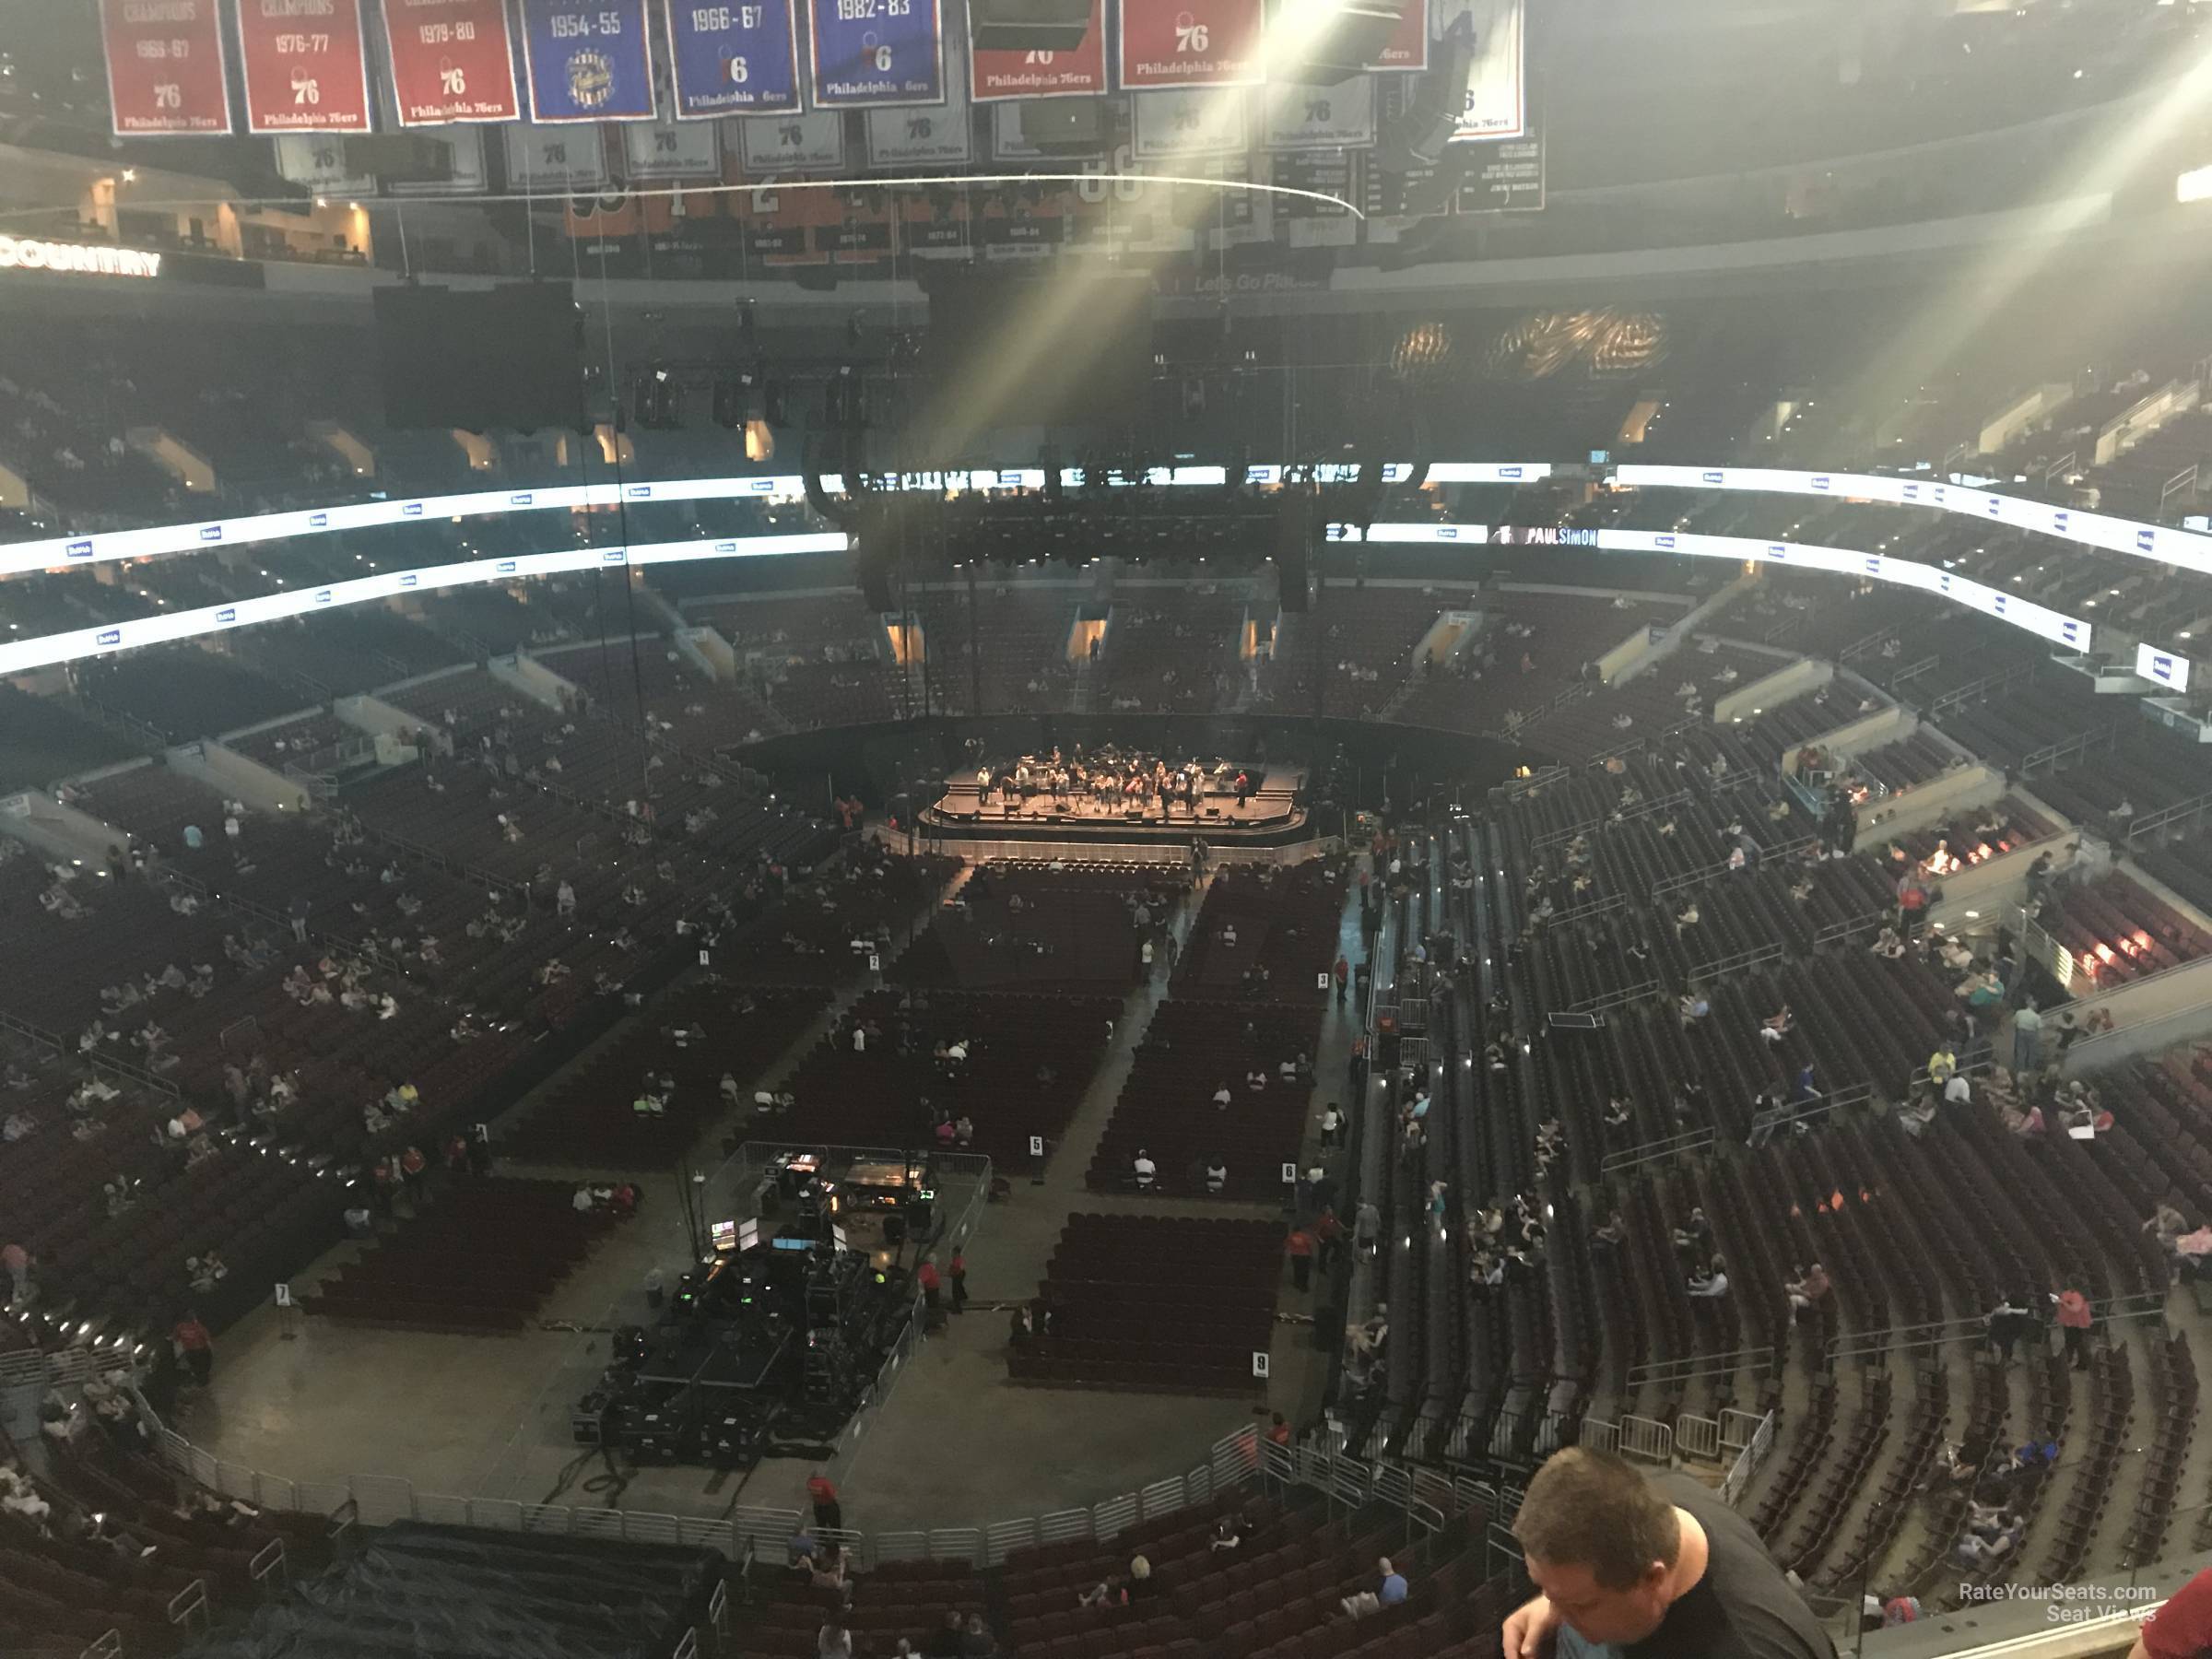 section 208, row 7 seat view  for concert - wells fargo center